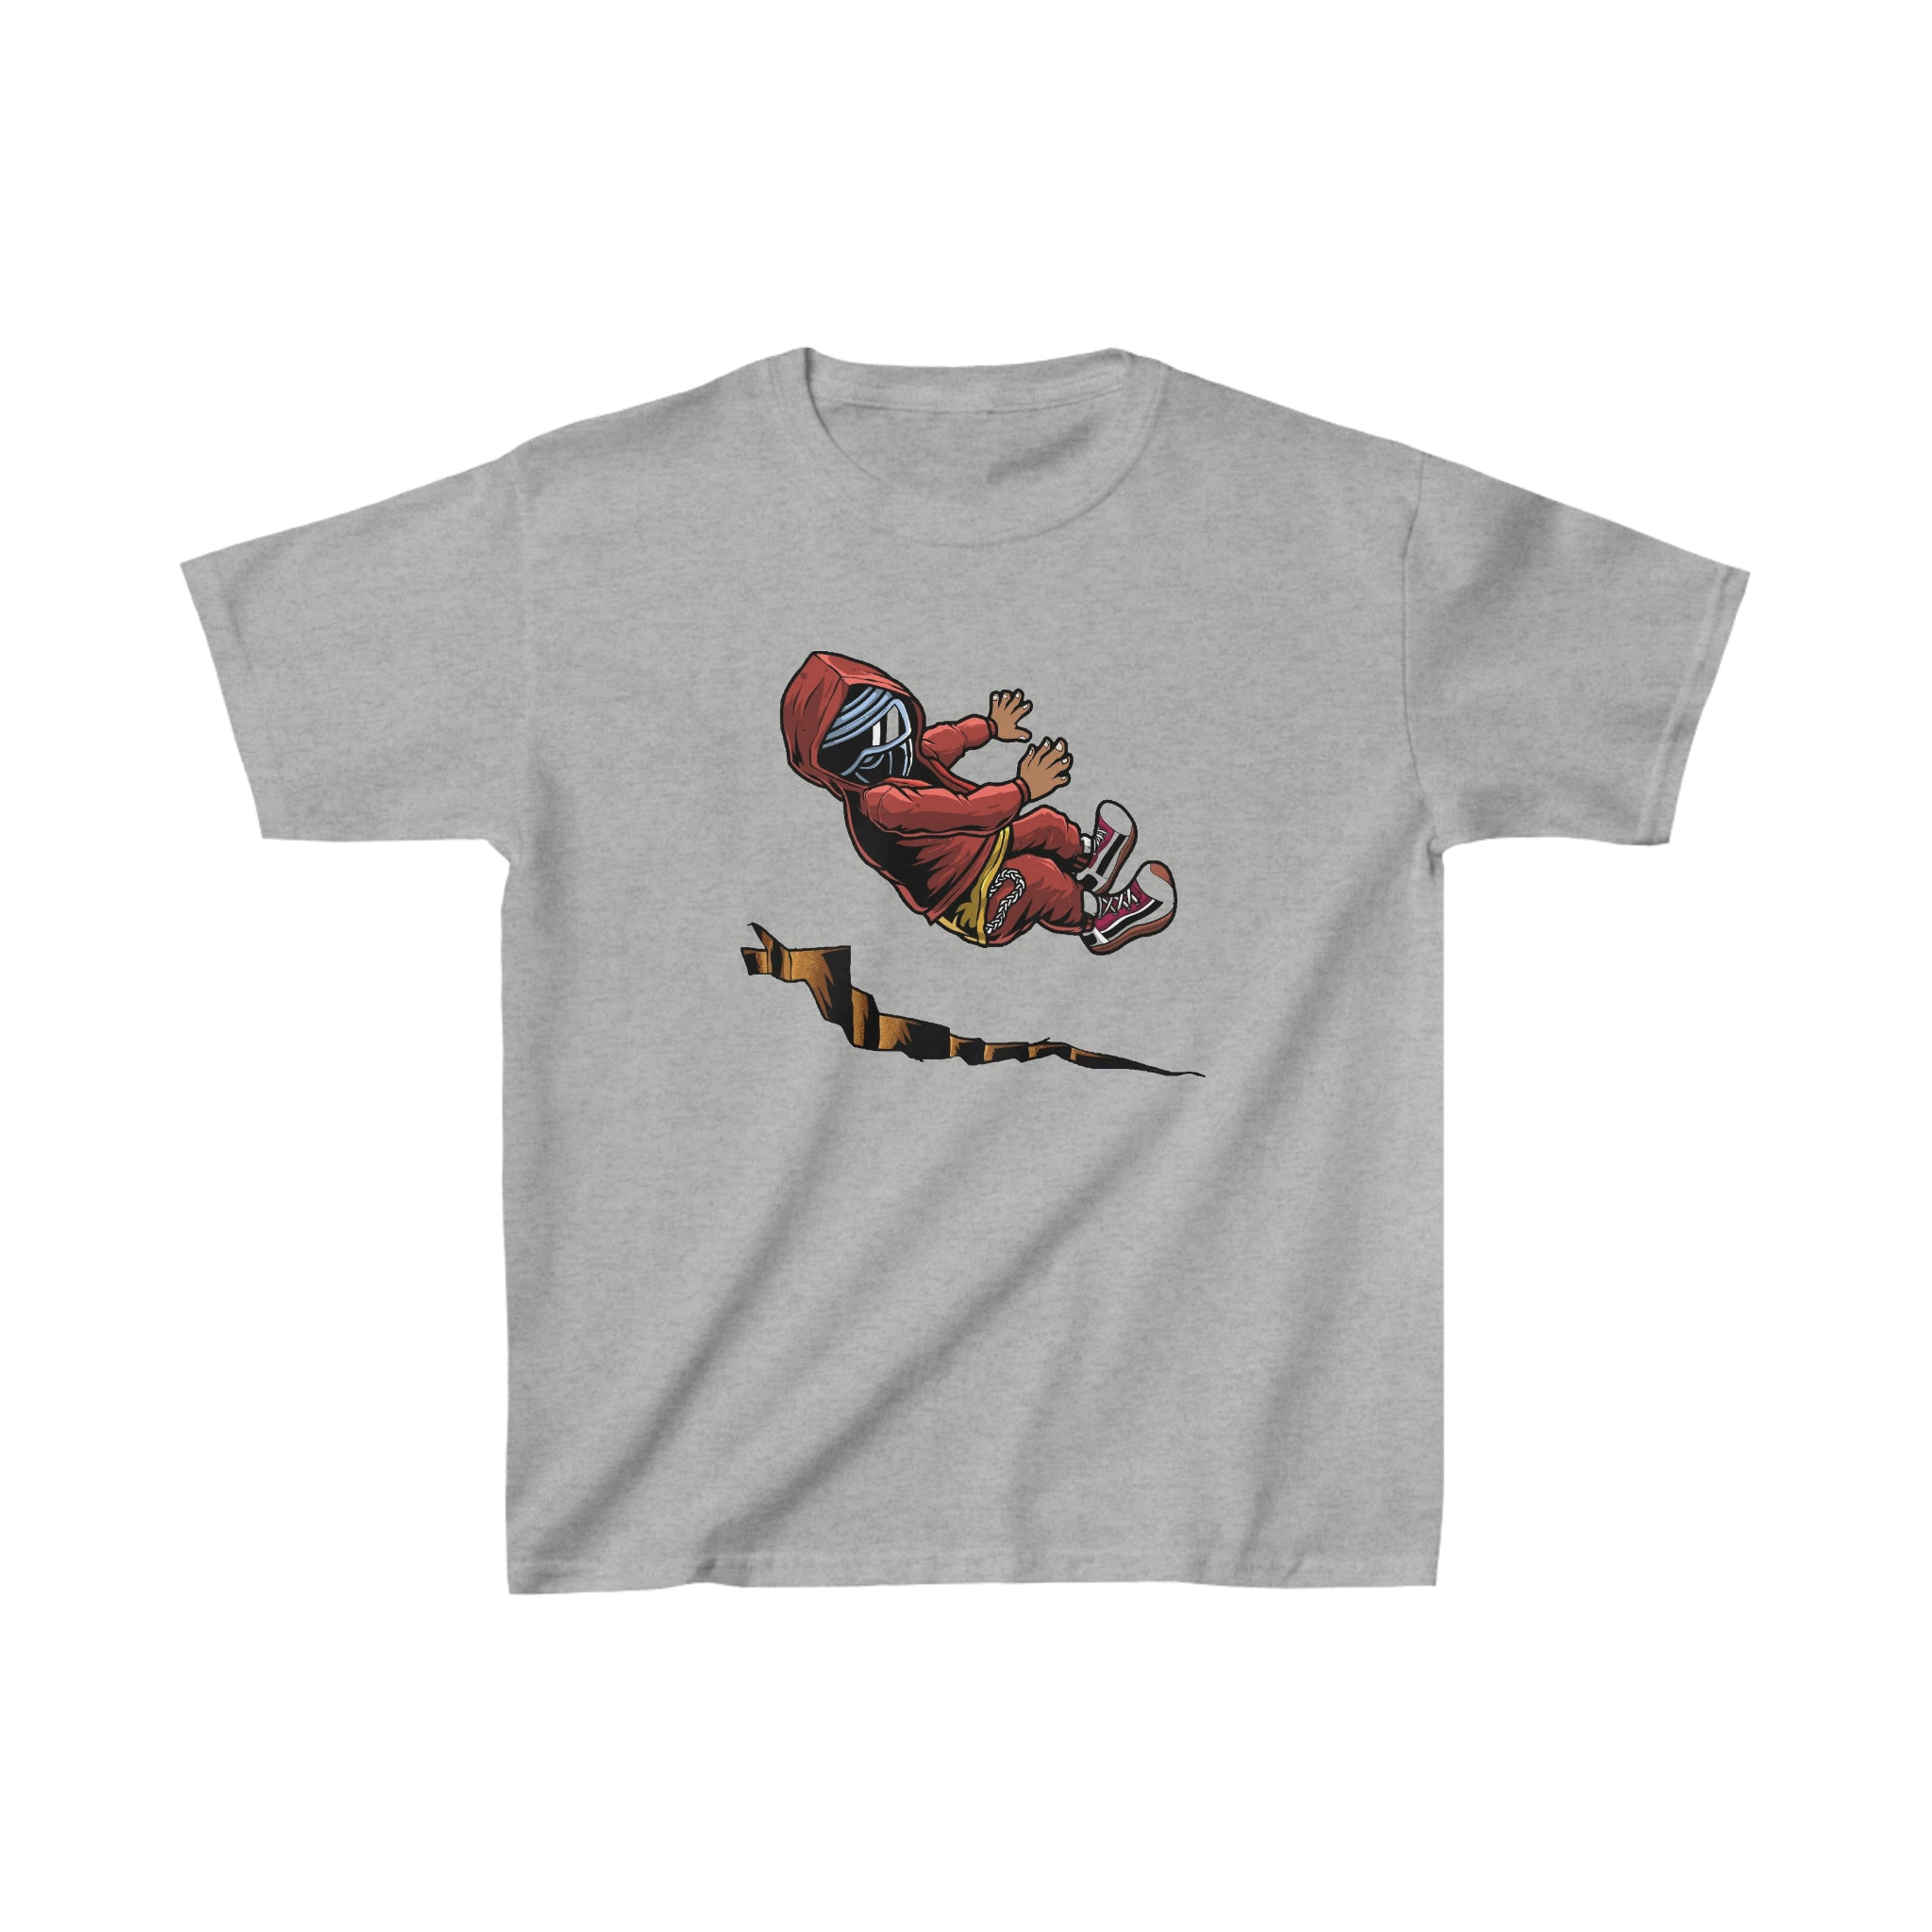 Jack dont fall in the crack Kids Heavy Cotton™ Tee